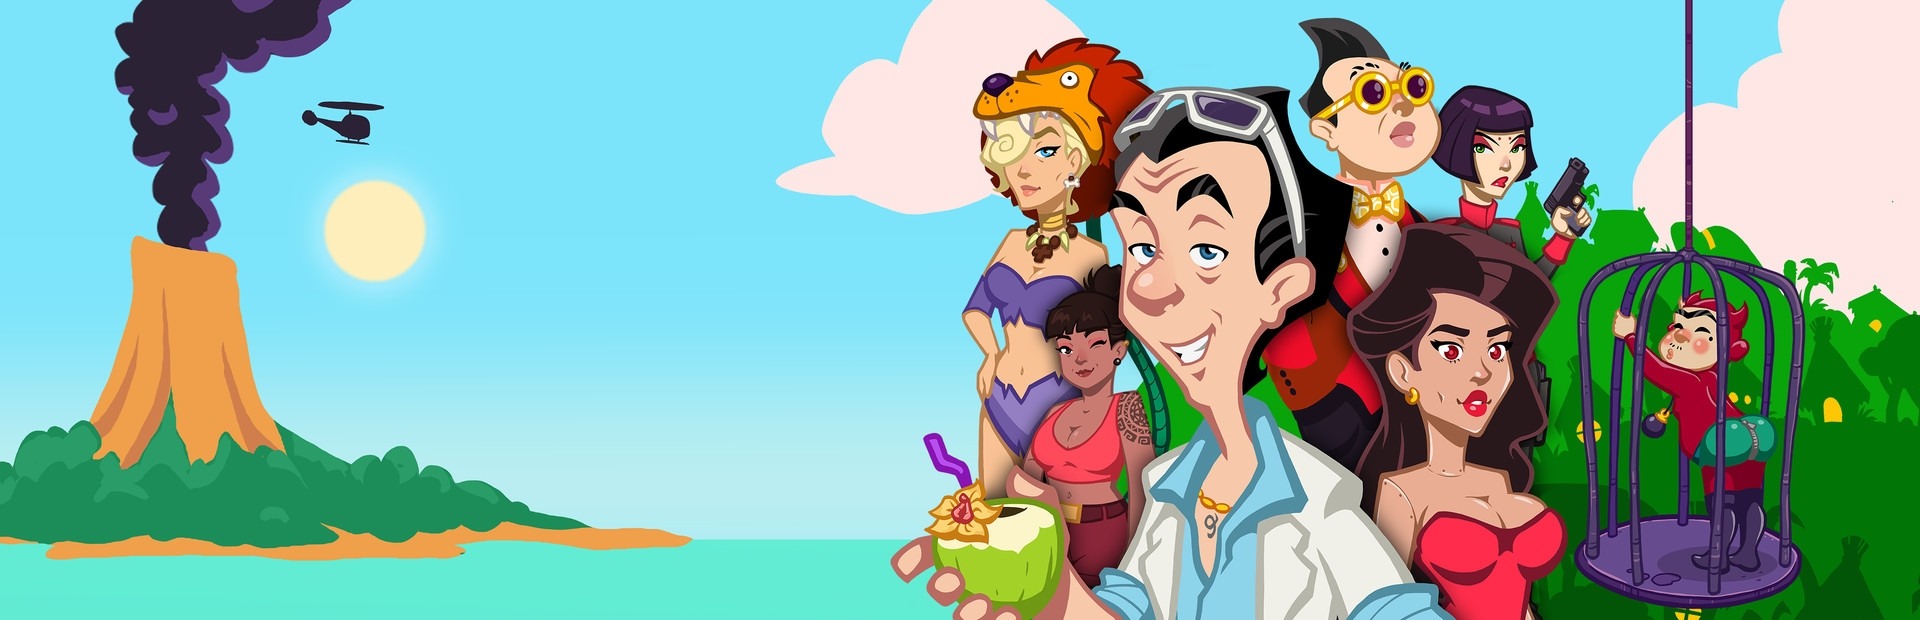 Leisure Suit Larry - Wet Dreams Dry Twice Save the World Edition